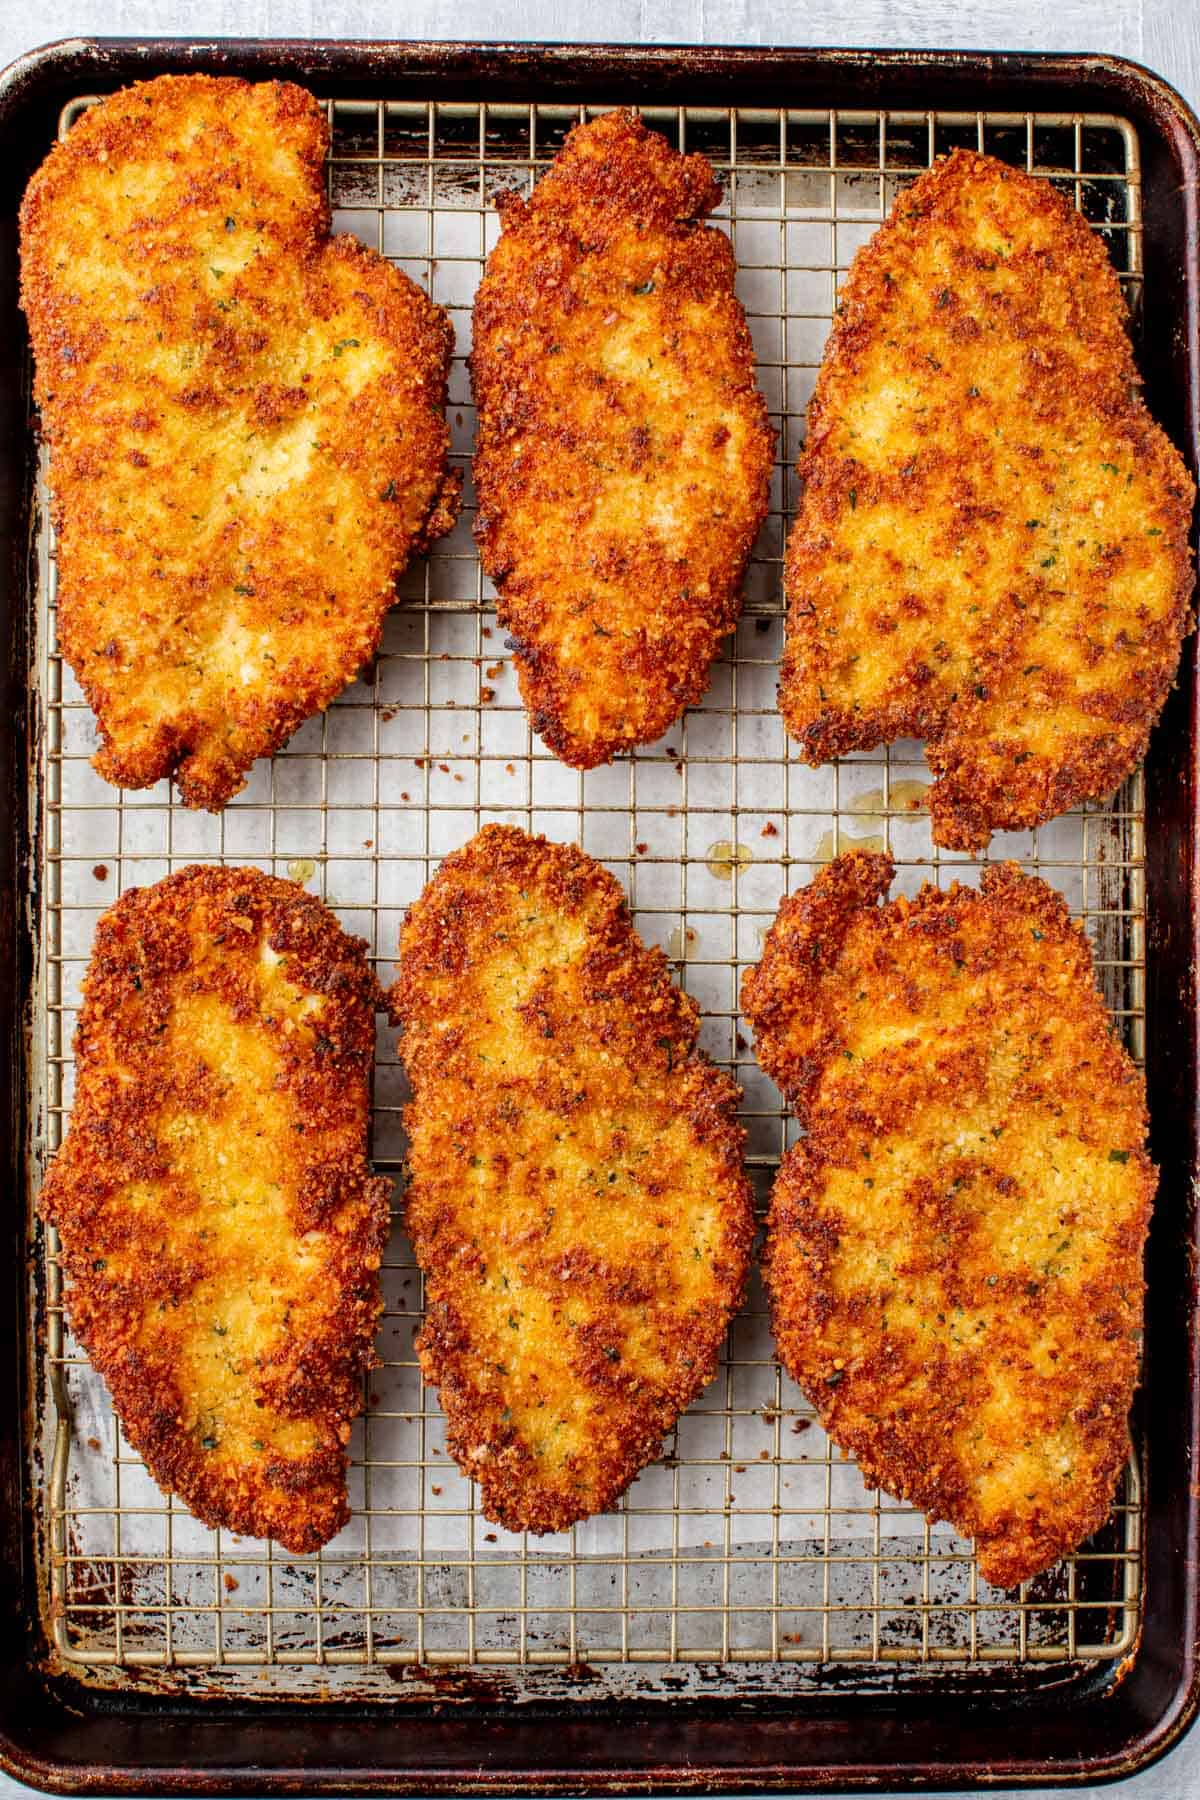 Crispy chicken cutlets cooling on a wire rack.